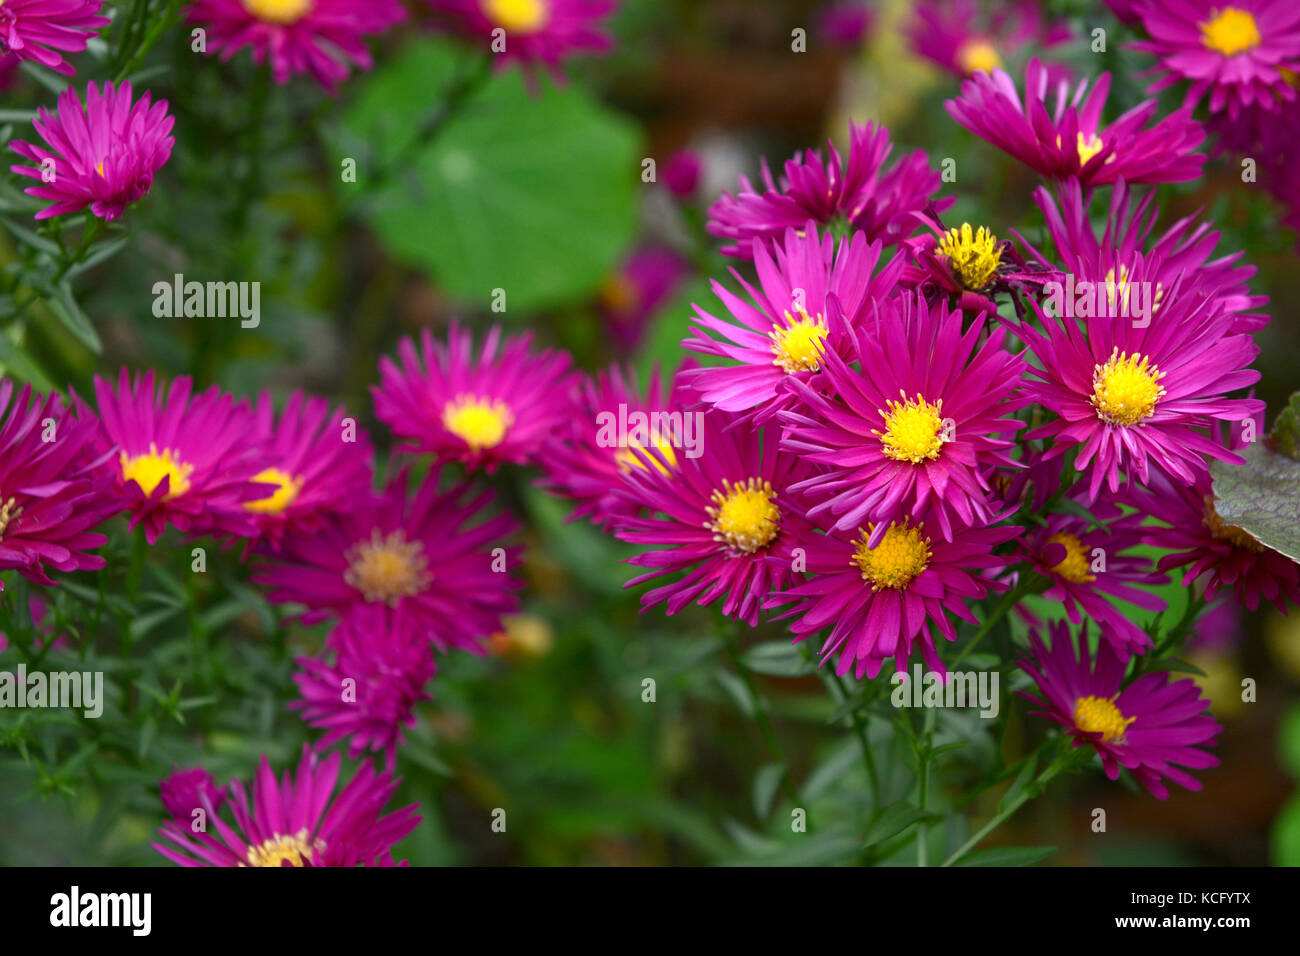 Cluster of Michaelmas daisies with magenta petals and yellow centres, a traditional autumn flower Stock Photo